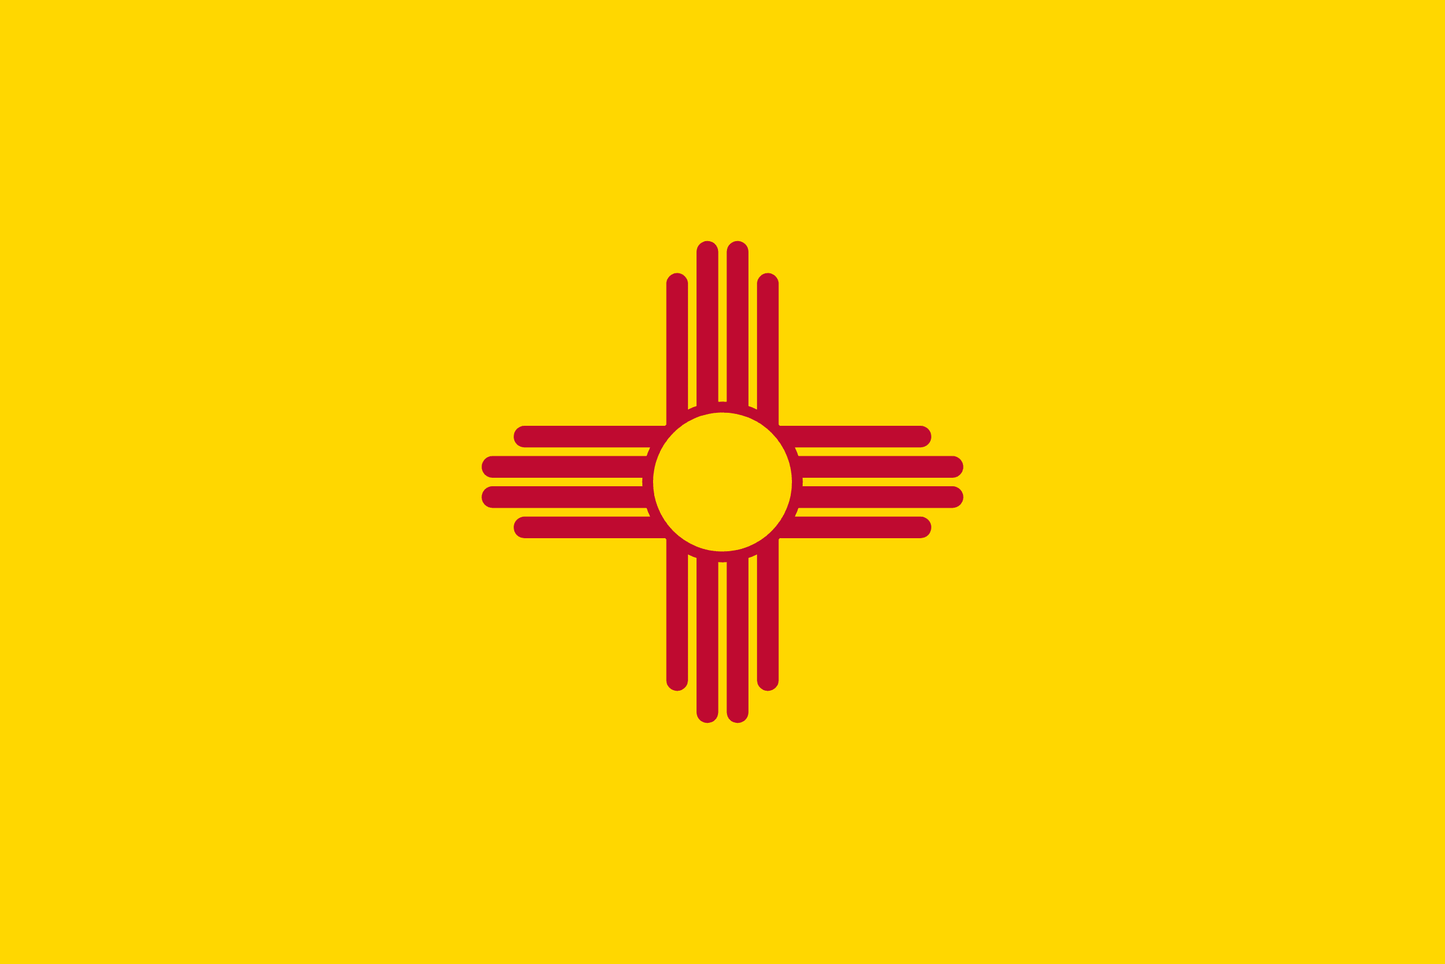 New Mexico State Flag - 3x5 Feet